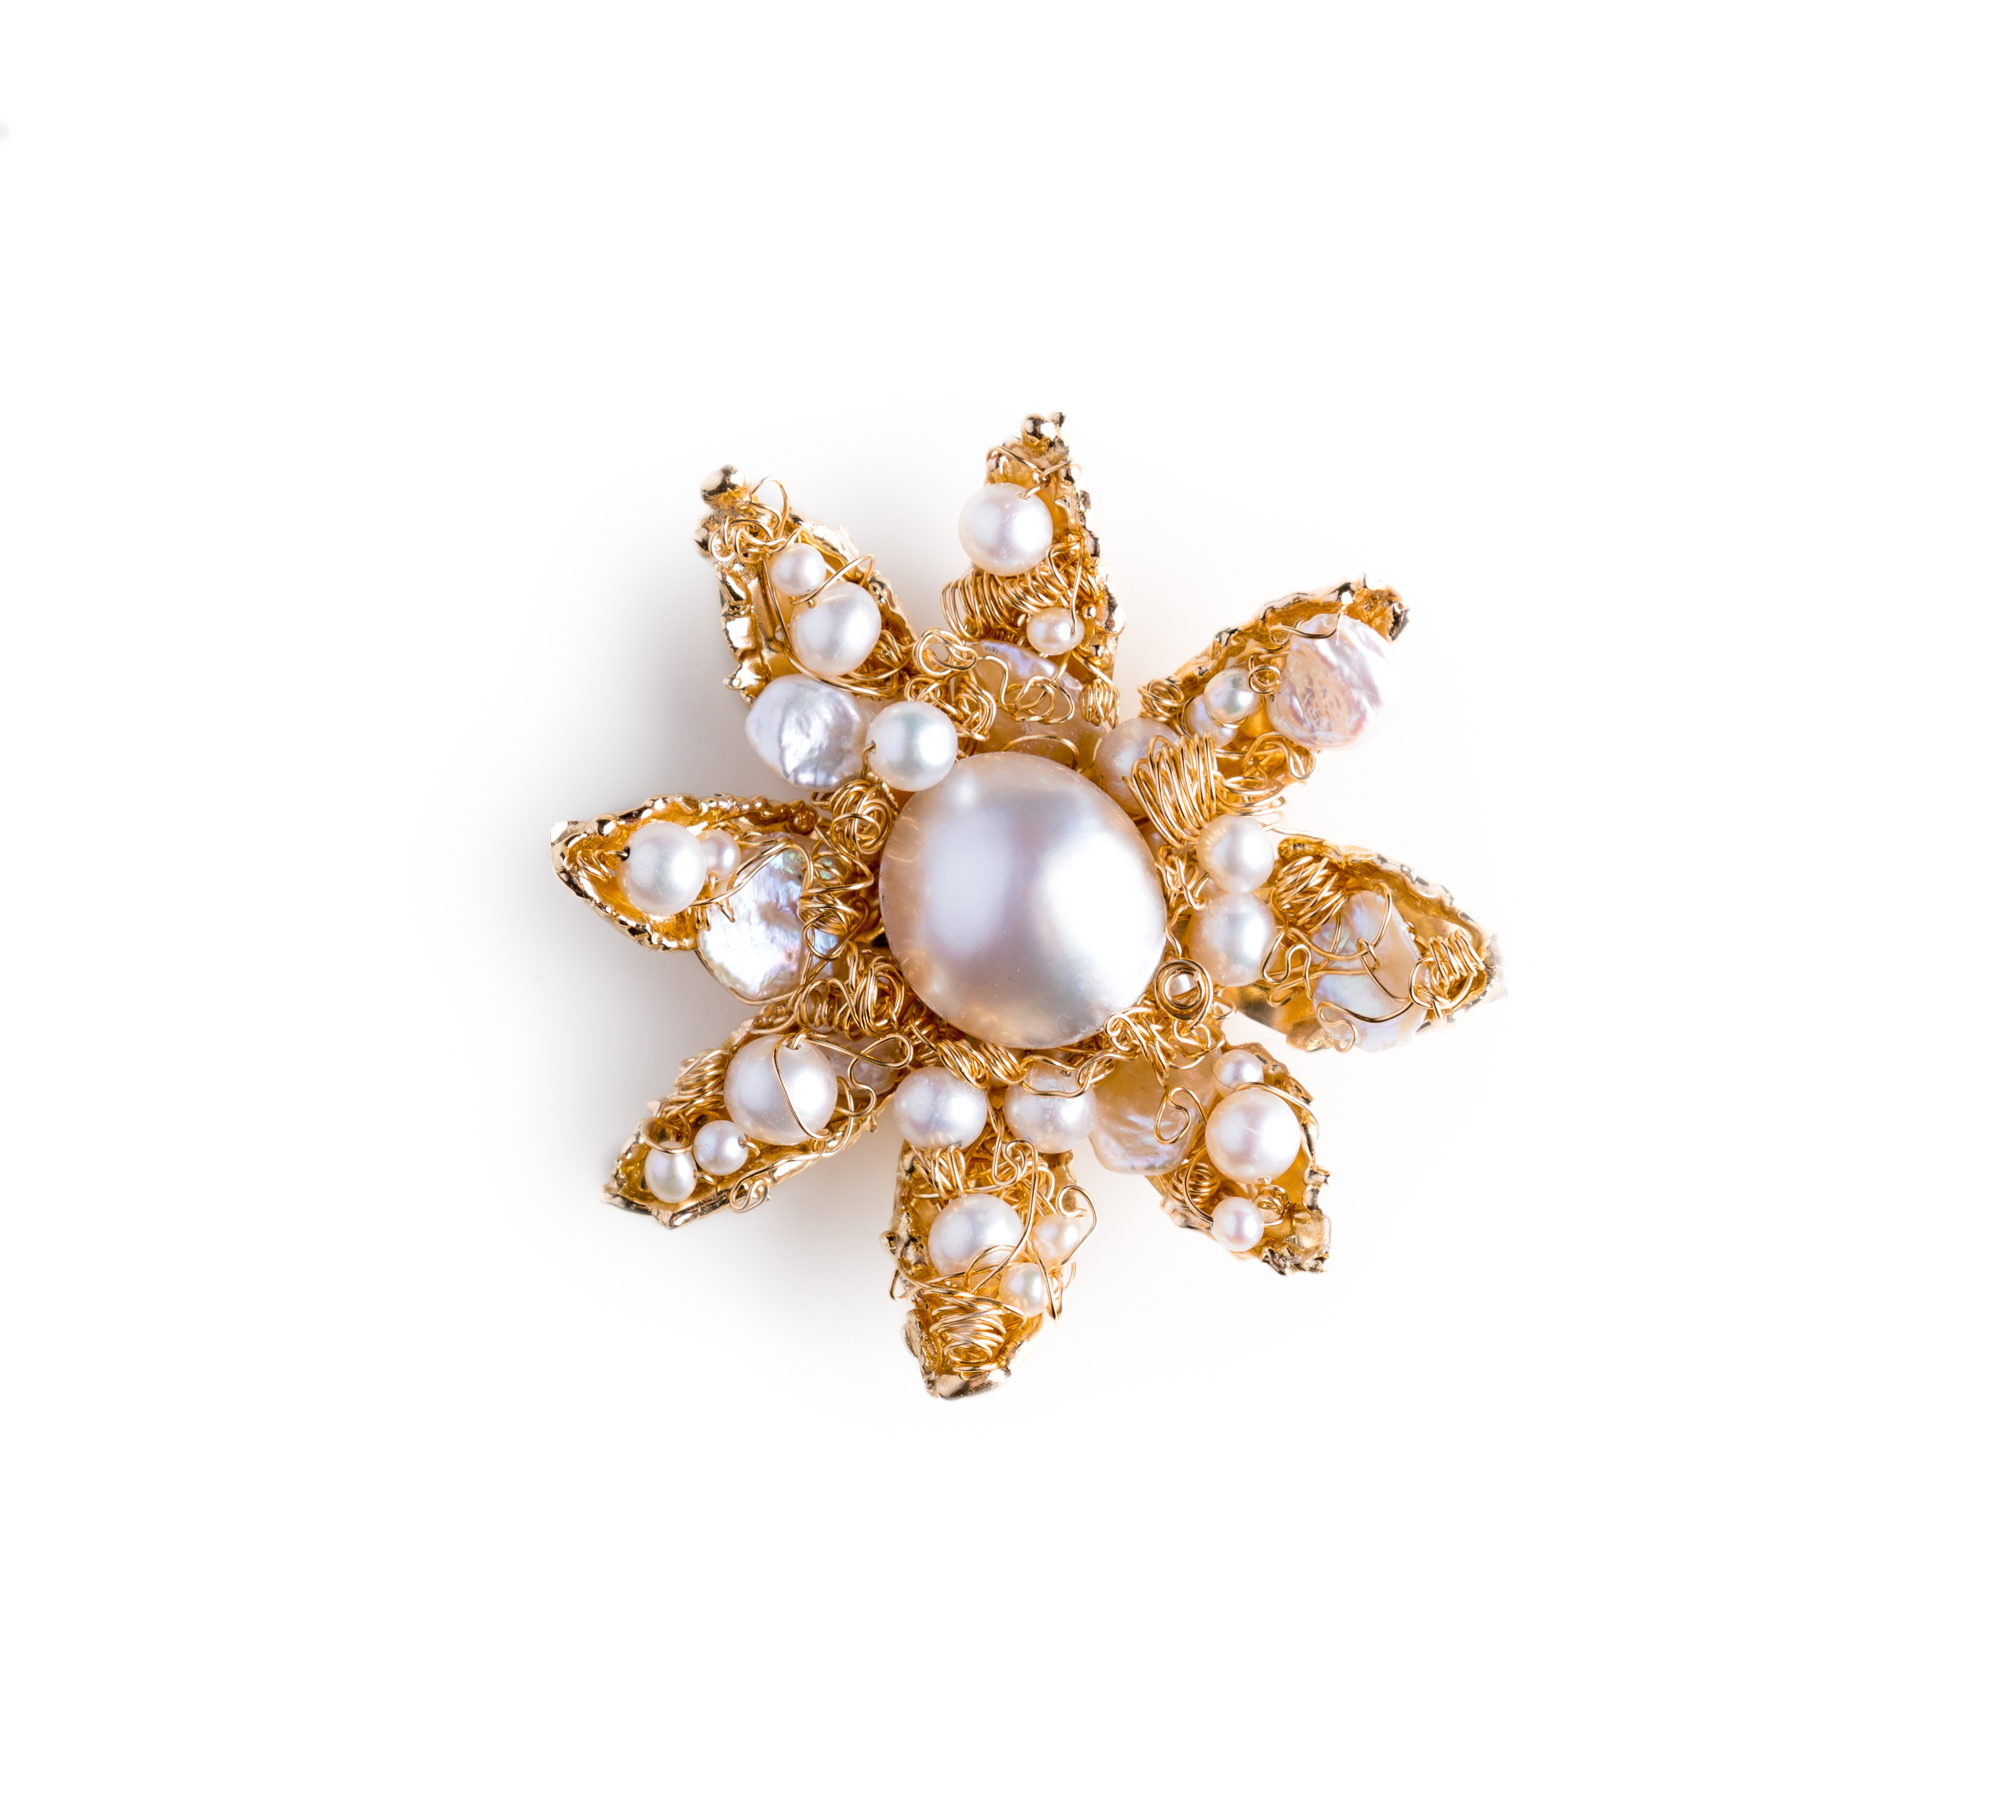 This gold-and-pearls brooch-pendant was created specifically for the upcoming Lunch in the Gardens: “Scents of the Riviera” by Nikki Sedacca. Photo courtesy of Molly Schechter